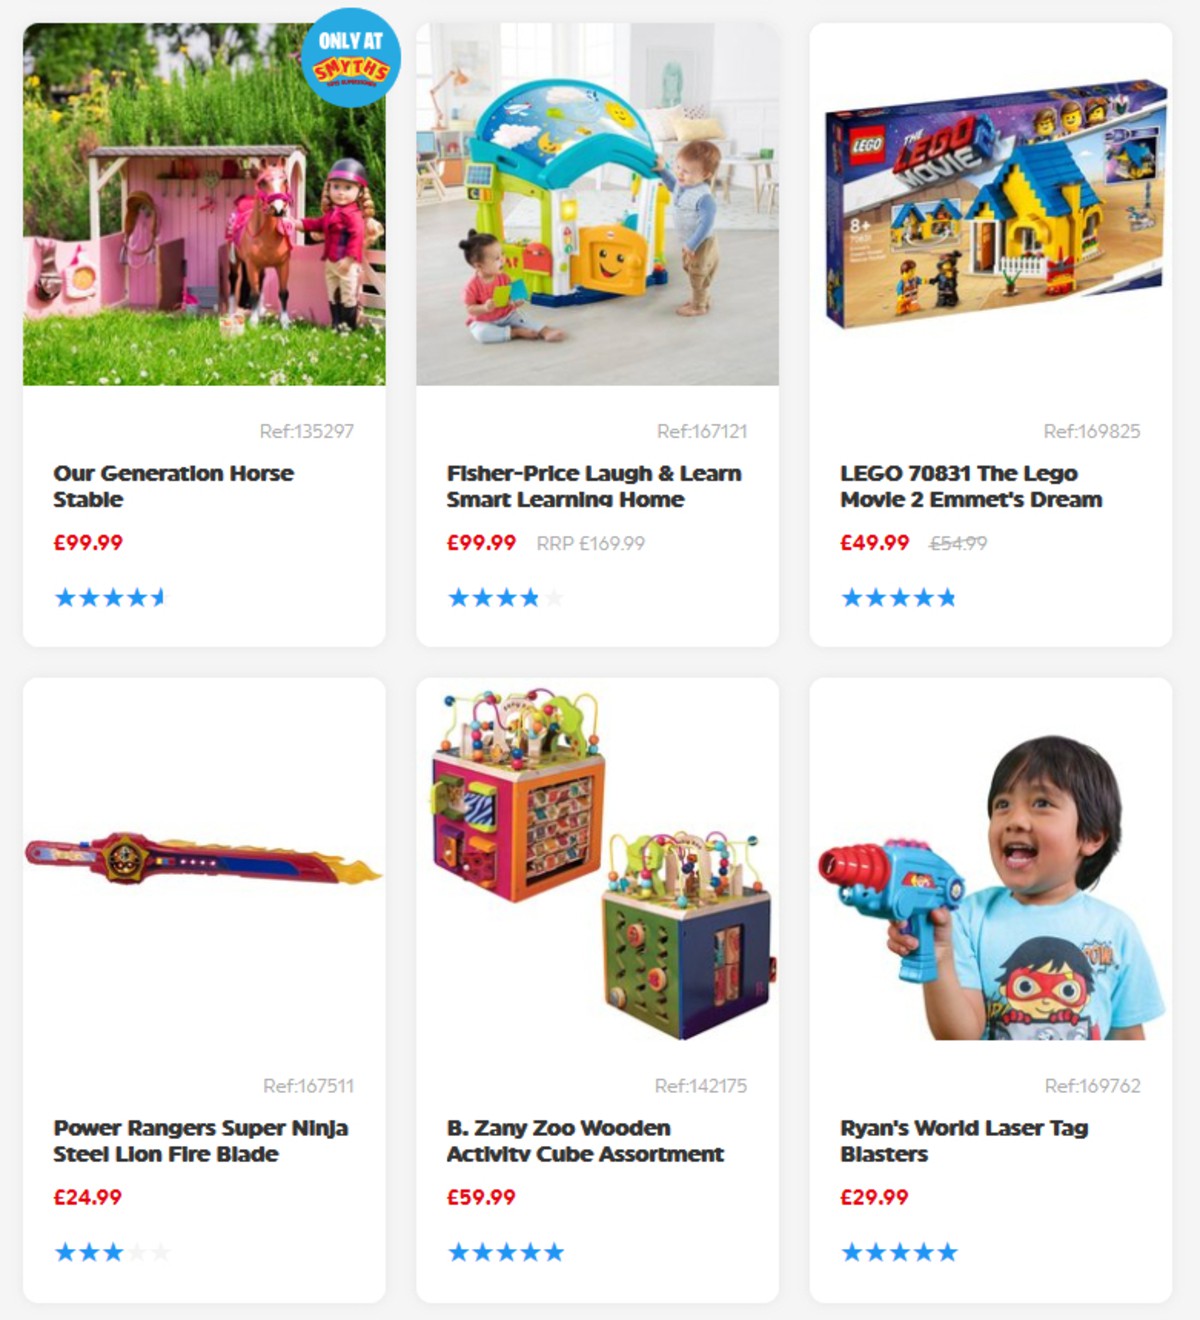 Smyths Toys Offers from 30 March